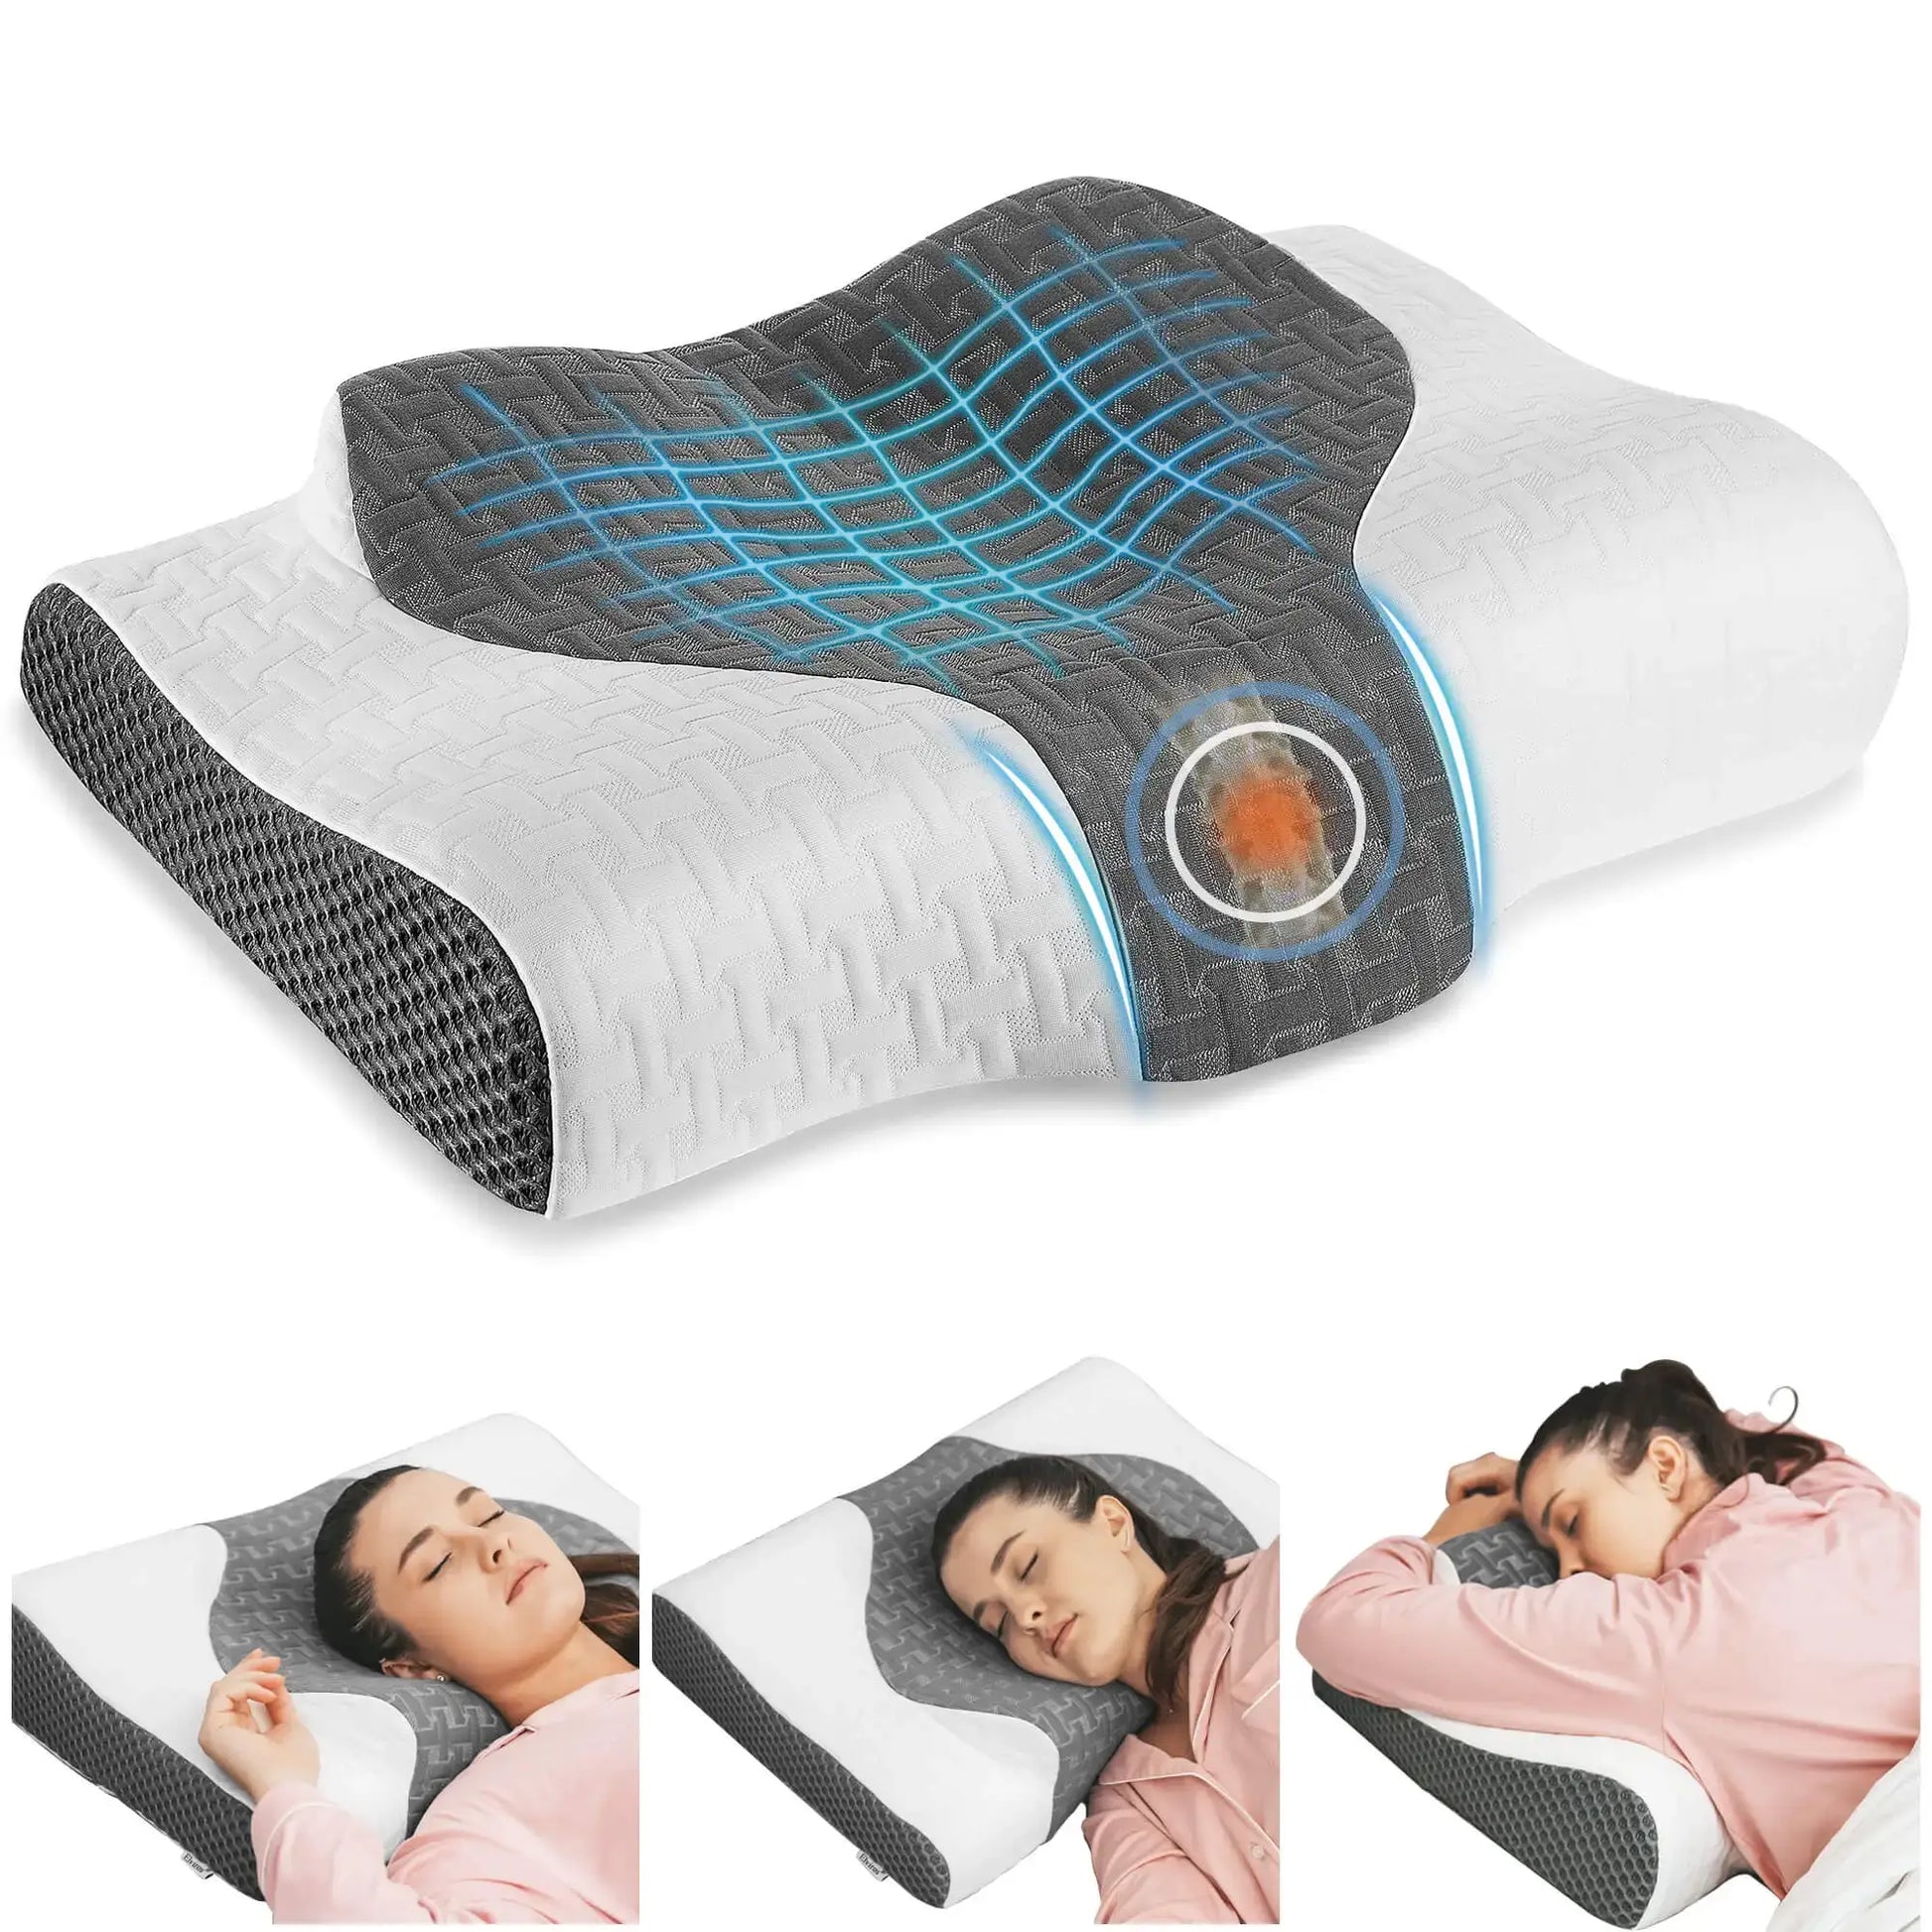 Elviros 2-in-1 Adjustable Firmness Cervical Pillow Gray / Queen Size 24*17*3.3/4.9 Inches